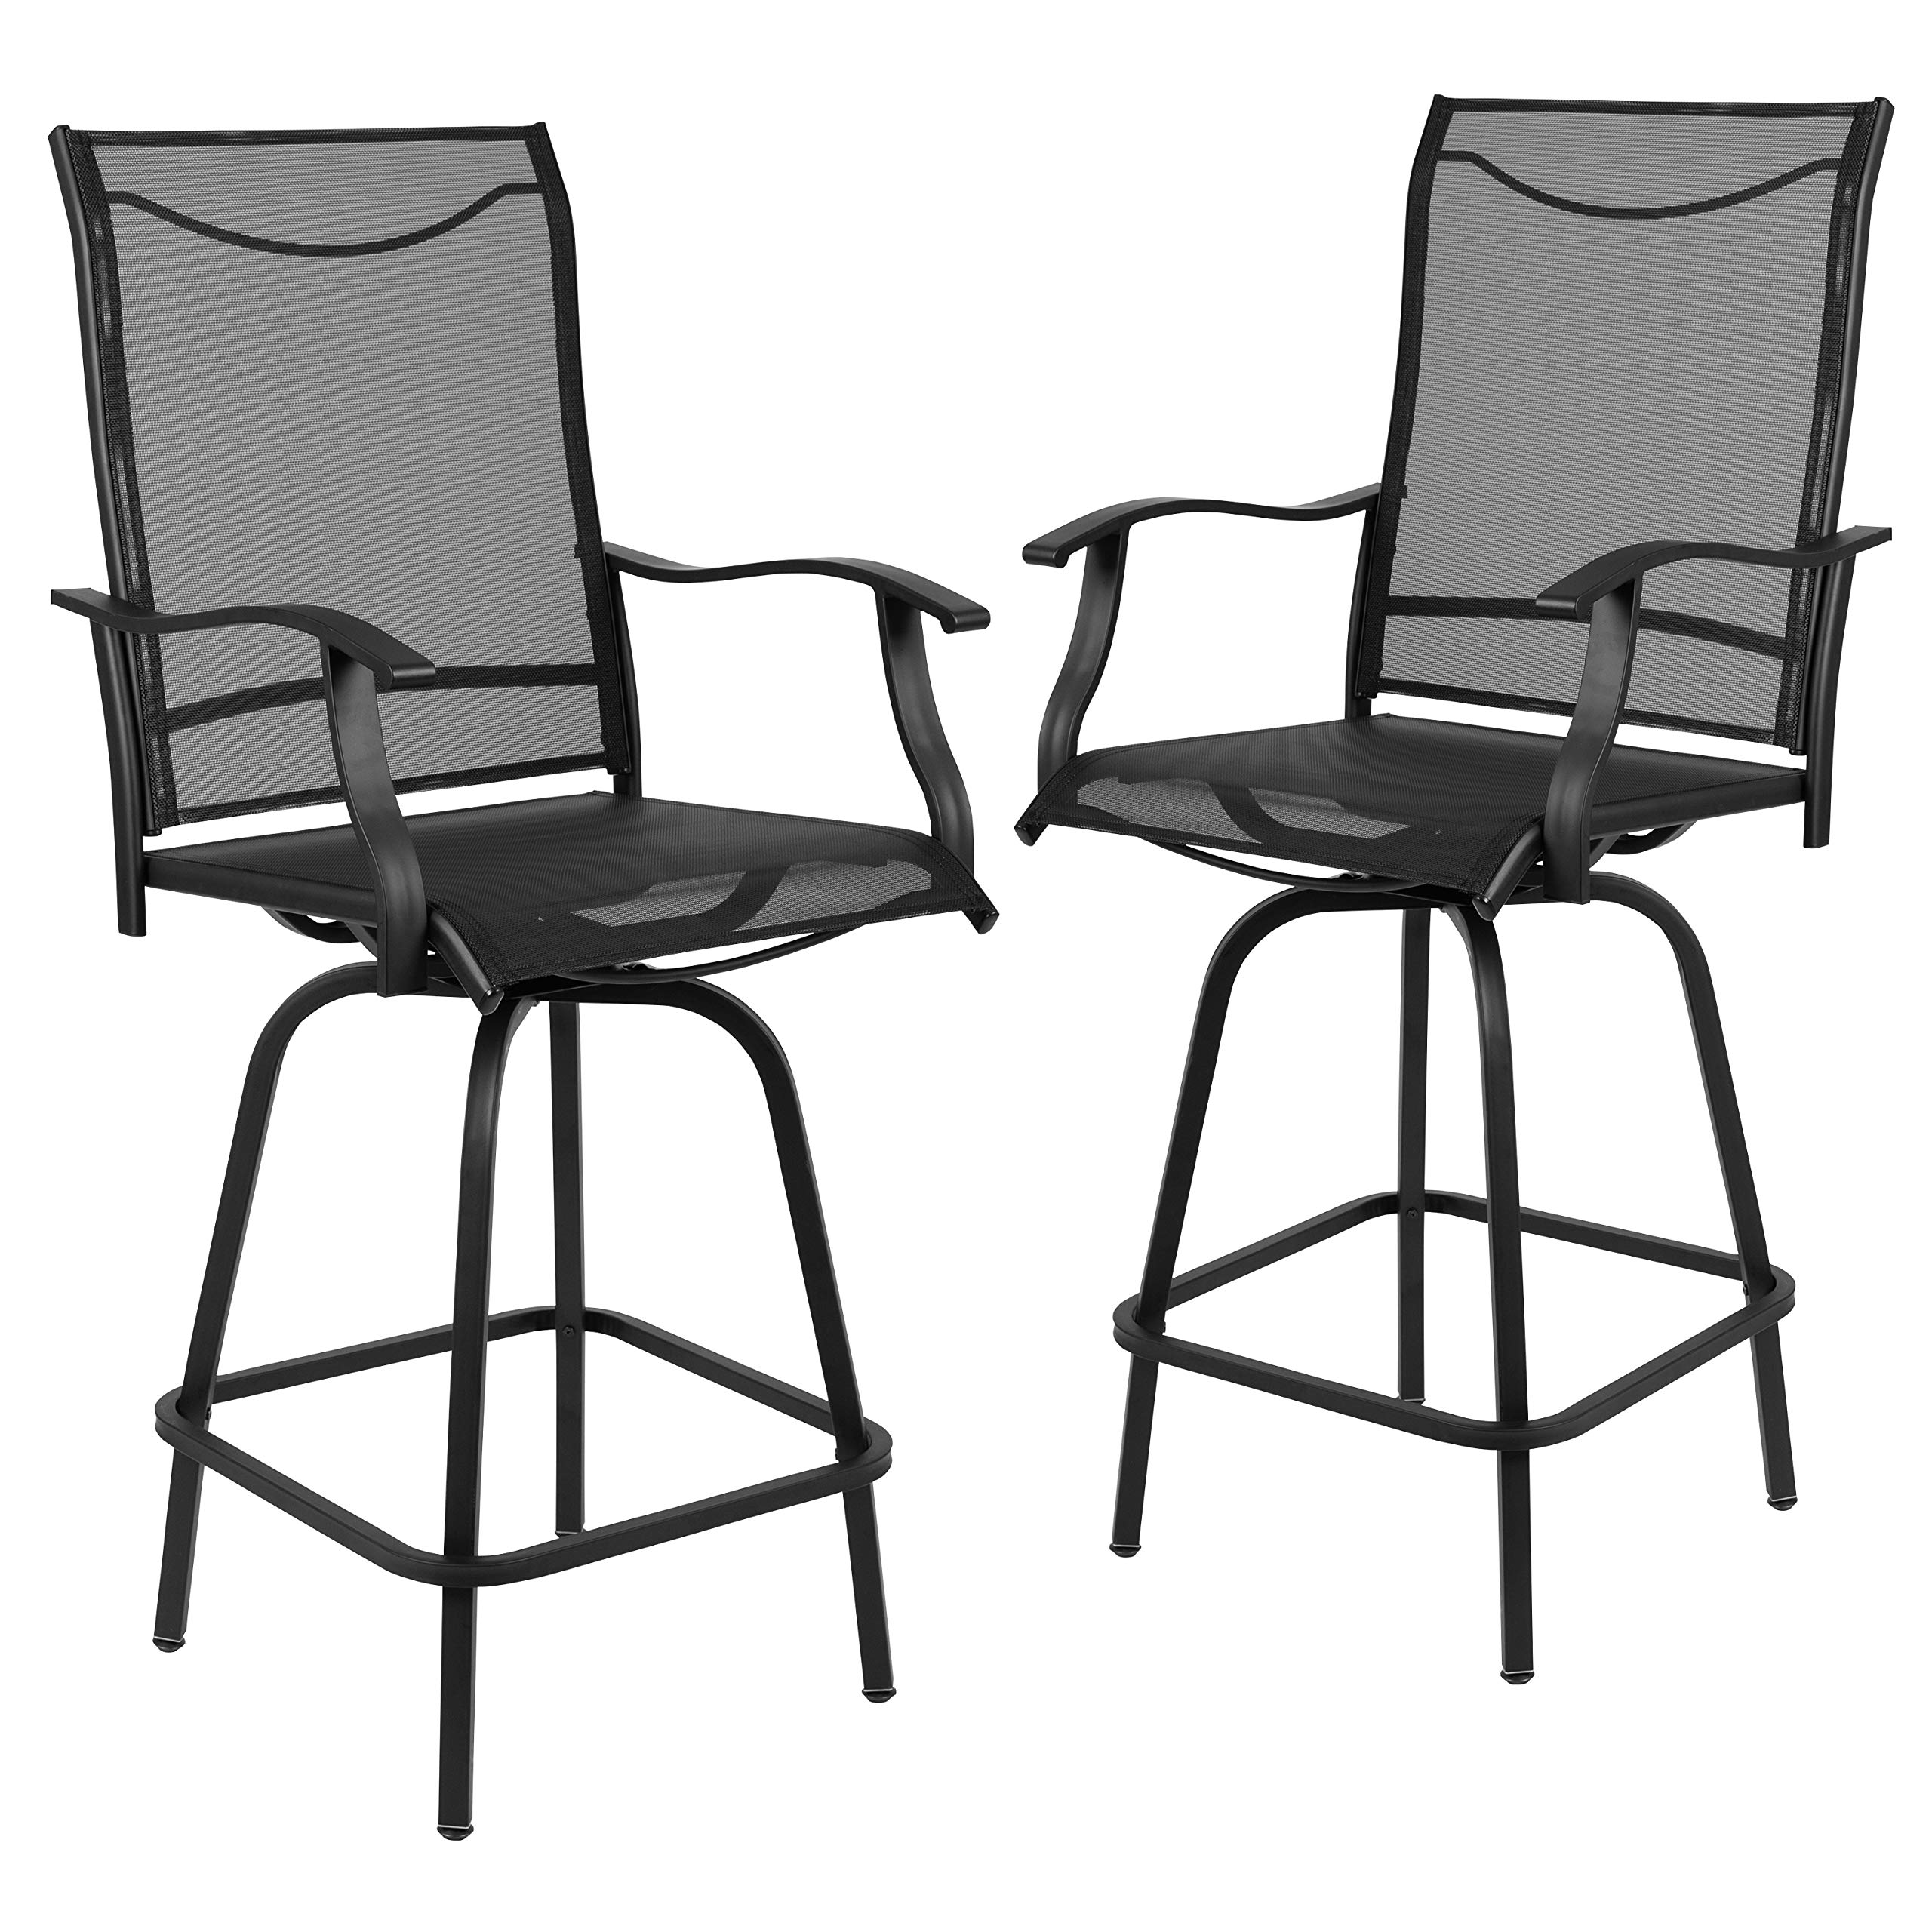 Flash Furniture Valerie Patio Bar Height Stools Set of 2, All-Weather Textilene Swivel Patio Stools with High Back & Armrests in Black